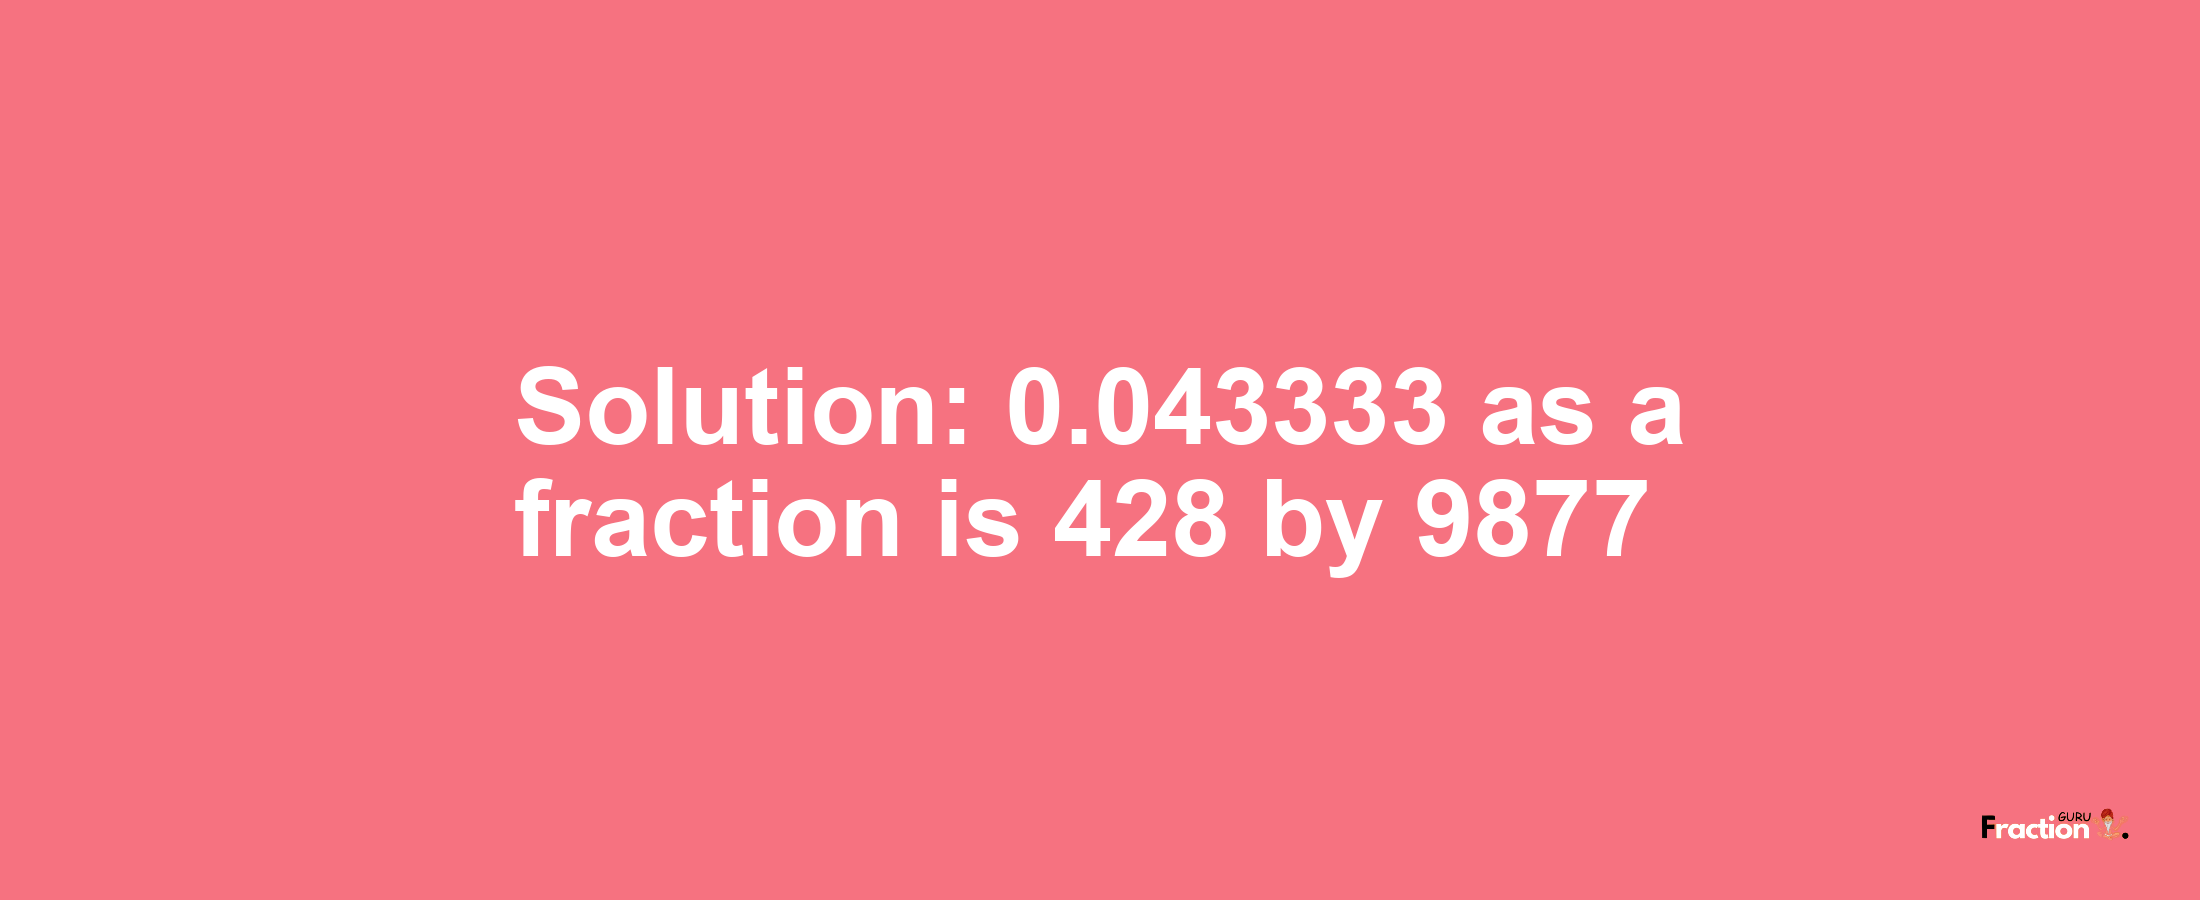 Solution:0.043333 as a fraction is 428/9877